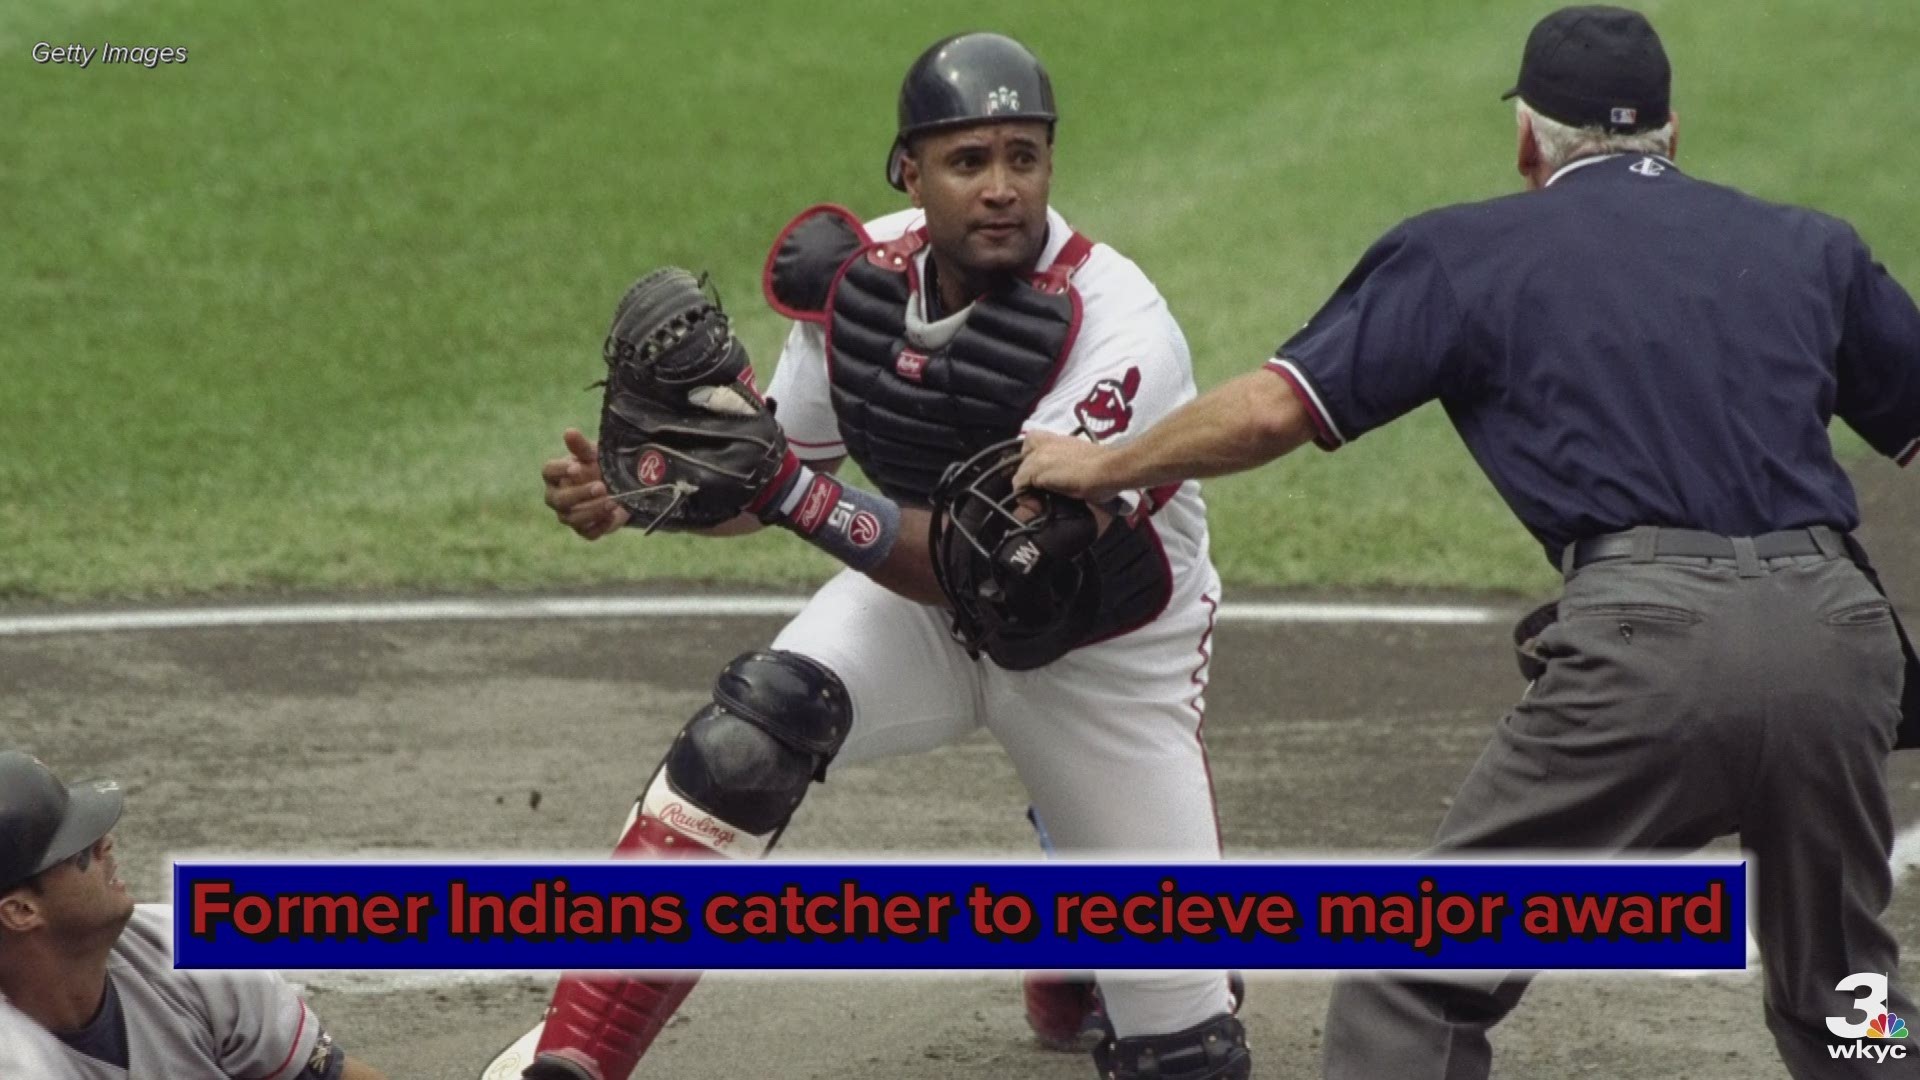 Alomar Jr. spent 11 of his 20 seasons in Major League Baseball with the Indians.